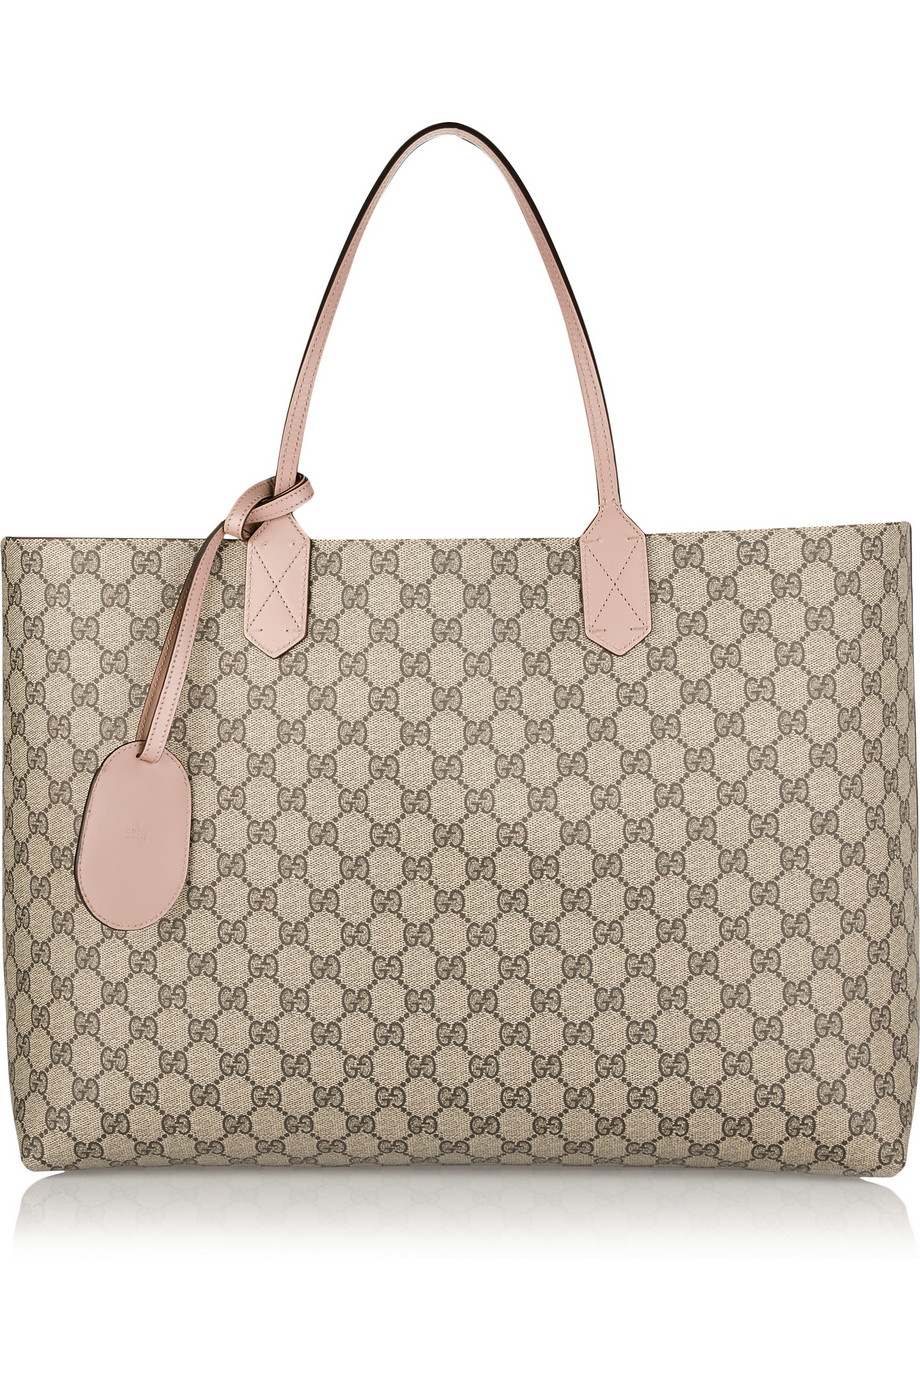 Gucci Turnaround Large Reversible Leather Tote in Blush/Taupe (Pink) - Lyst